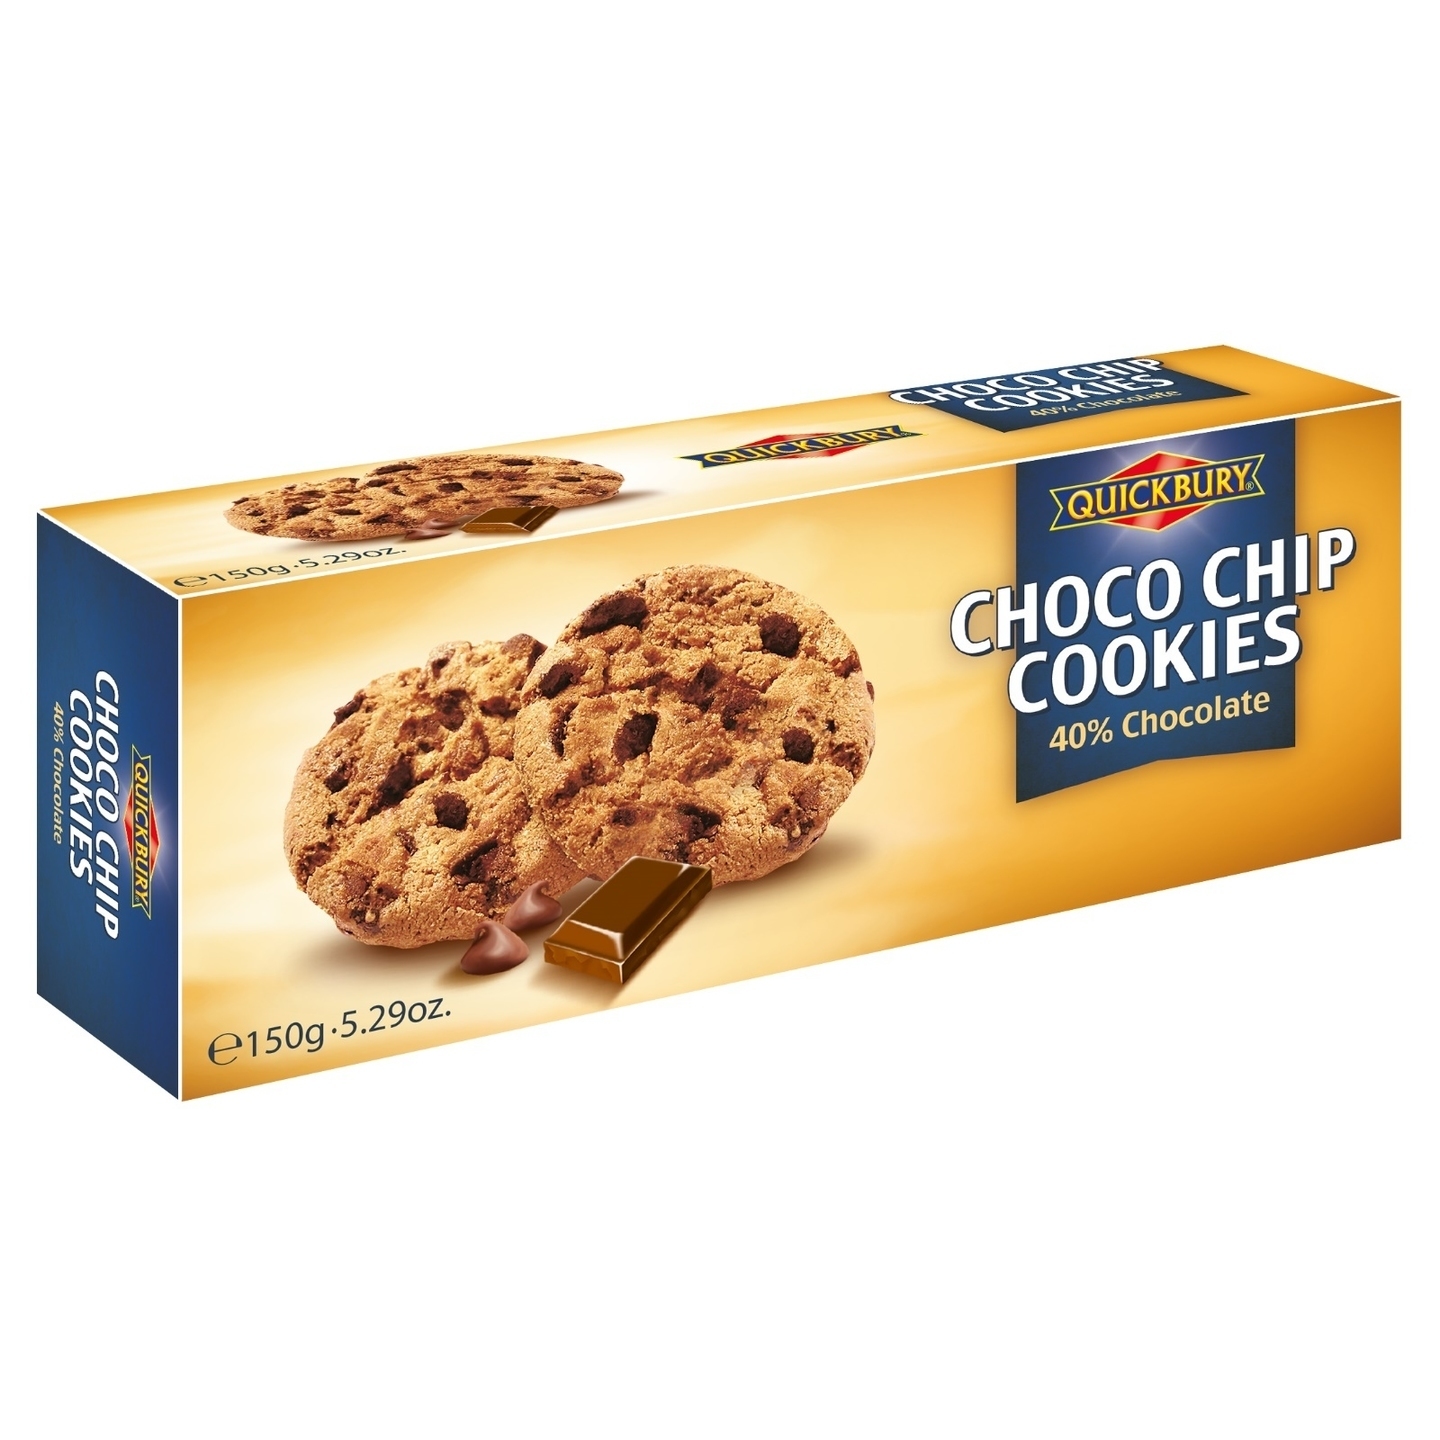 Quickbury Choco Chip Cookies with 40 Chocolate